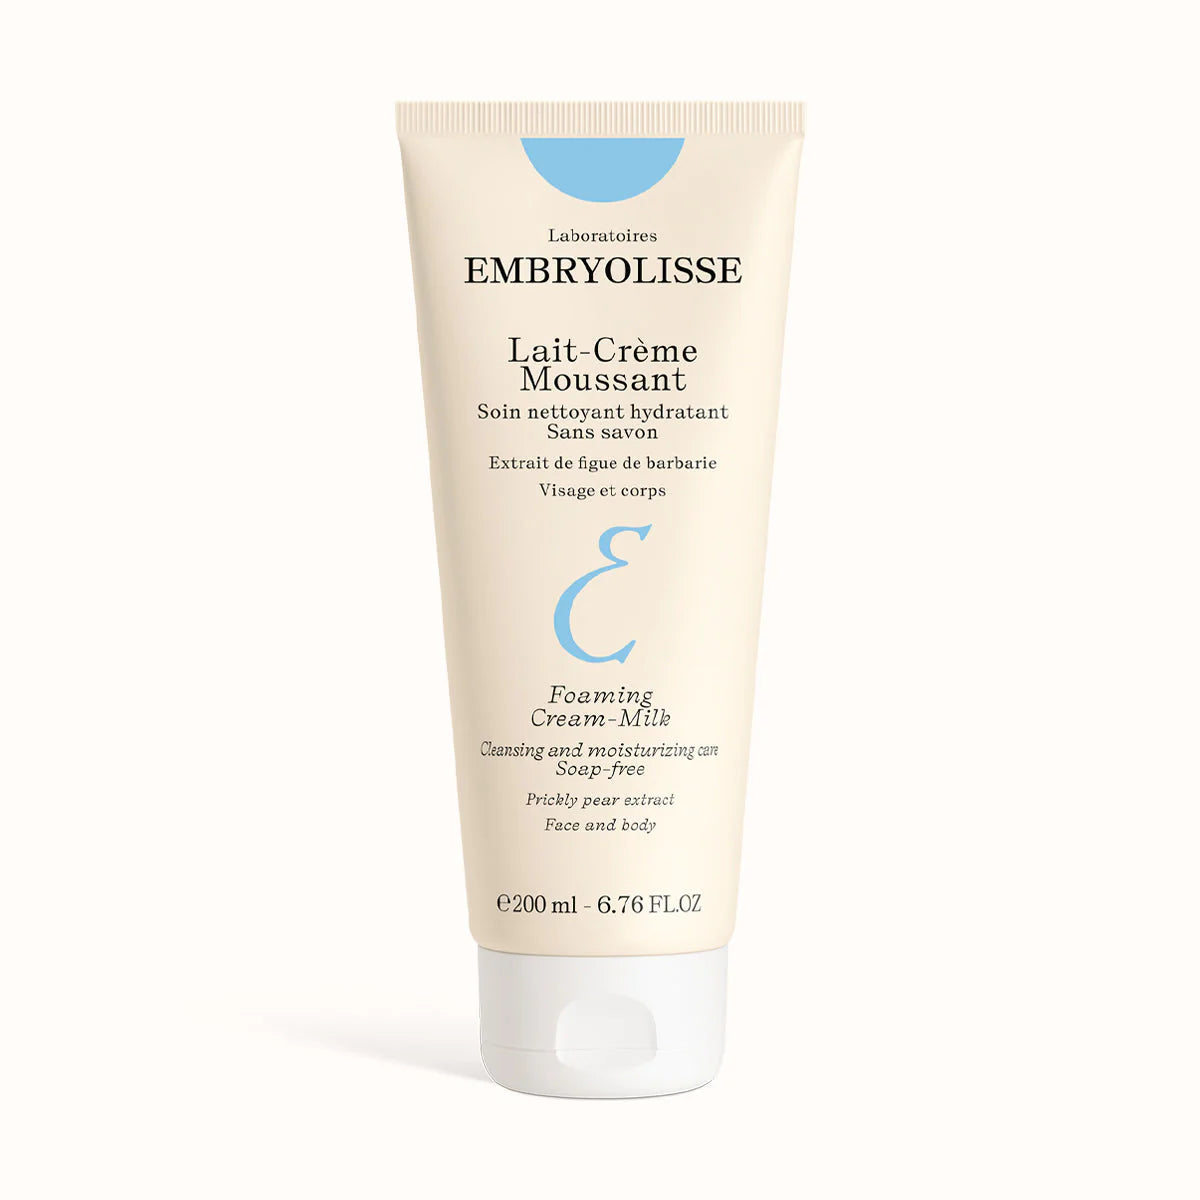 Embryolisse Foaming Cream Milk - Face and Body Cleanser